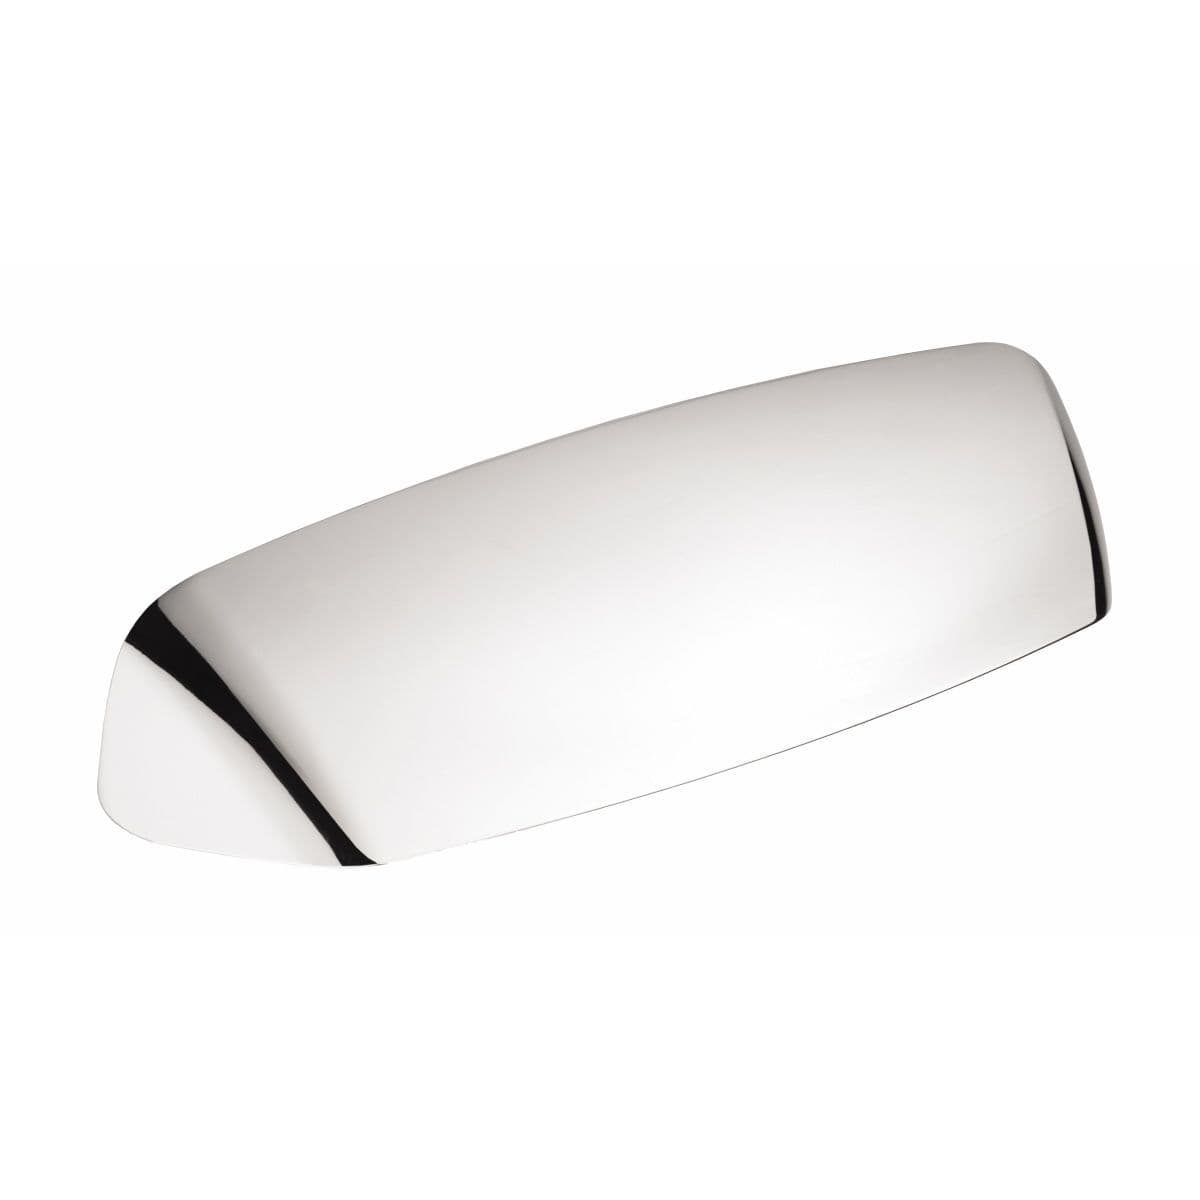 HOXTON CUP Cupboard Handle - 96mm h/c size - 12 finishes (PWS H1104.96/H1108.96)